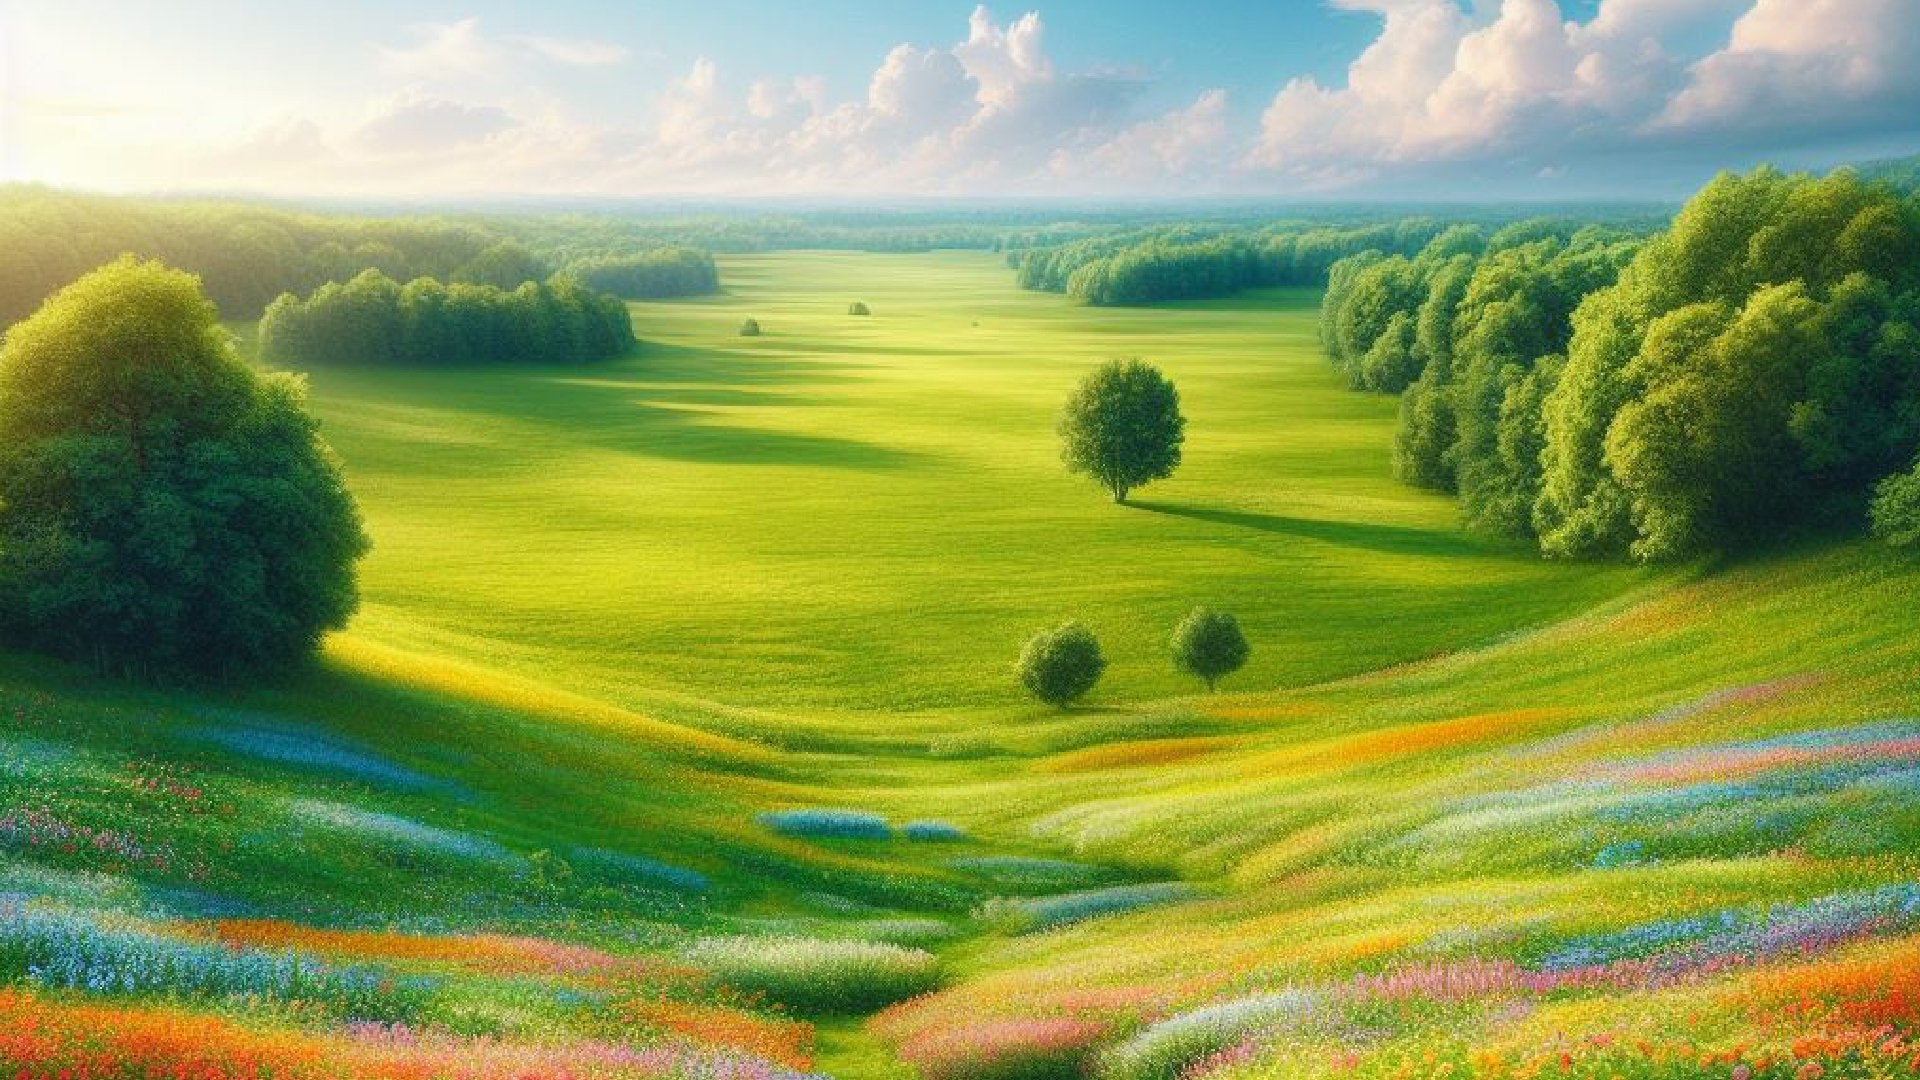 A huge open field full of green grass, colorful flowers, and a few trees under a clear blue sky. The perspective is from high above the land.